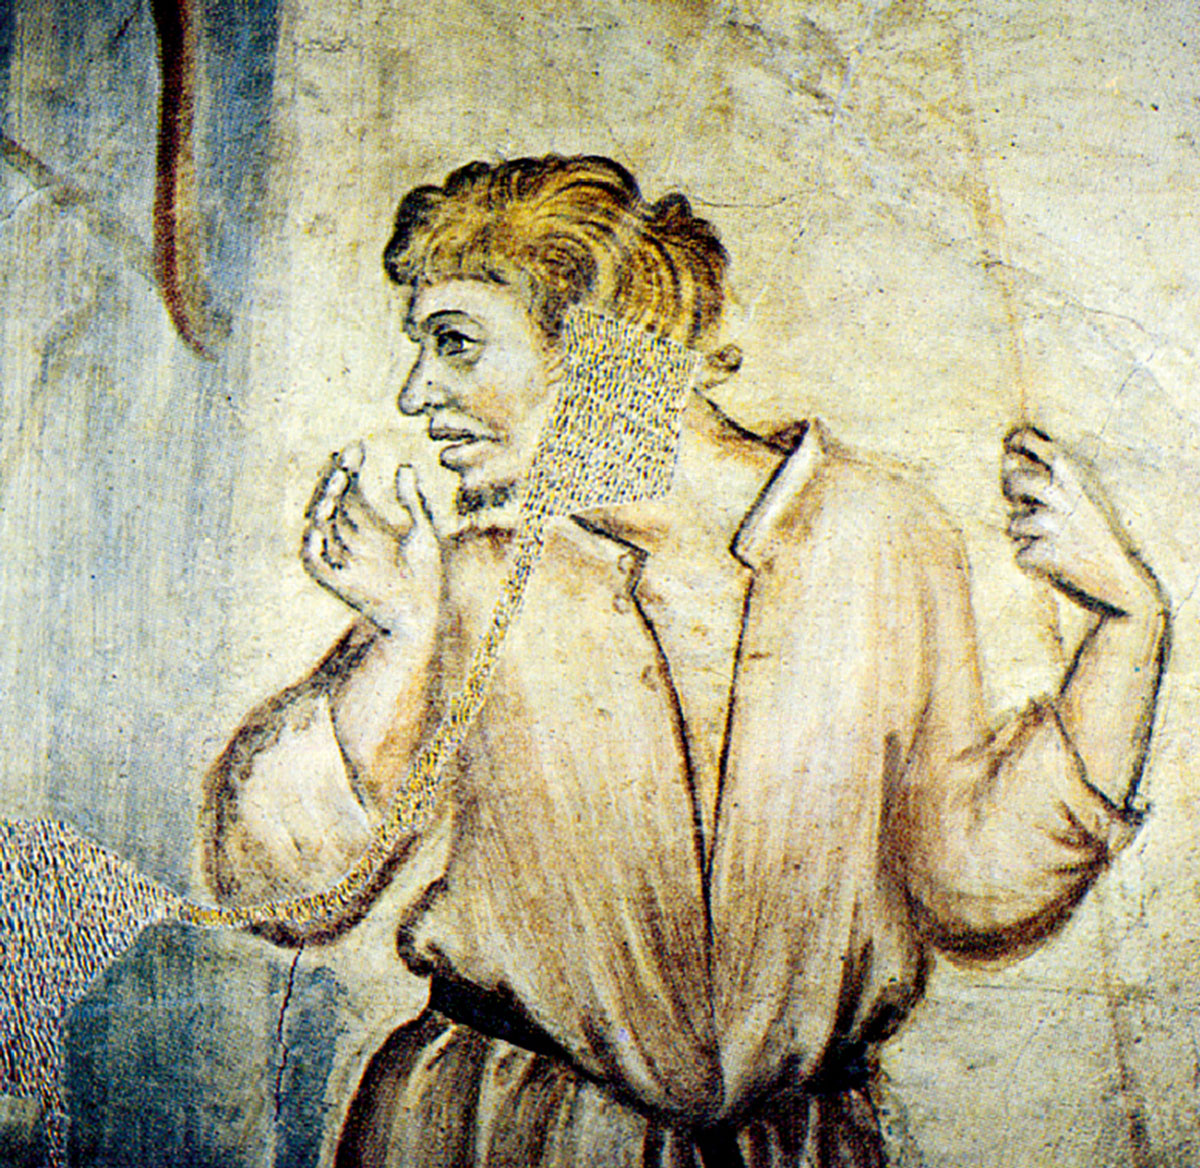 Example of the use of chromatic abstraction to fill a lacuna in an early fourteenth-century fresco in the Velluti Chapel of the Basilica of Santa Croce, Florence.